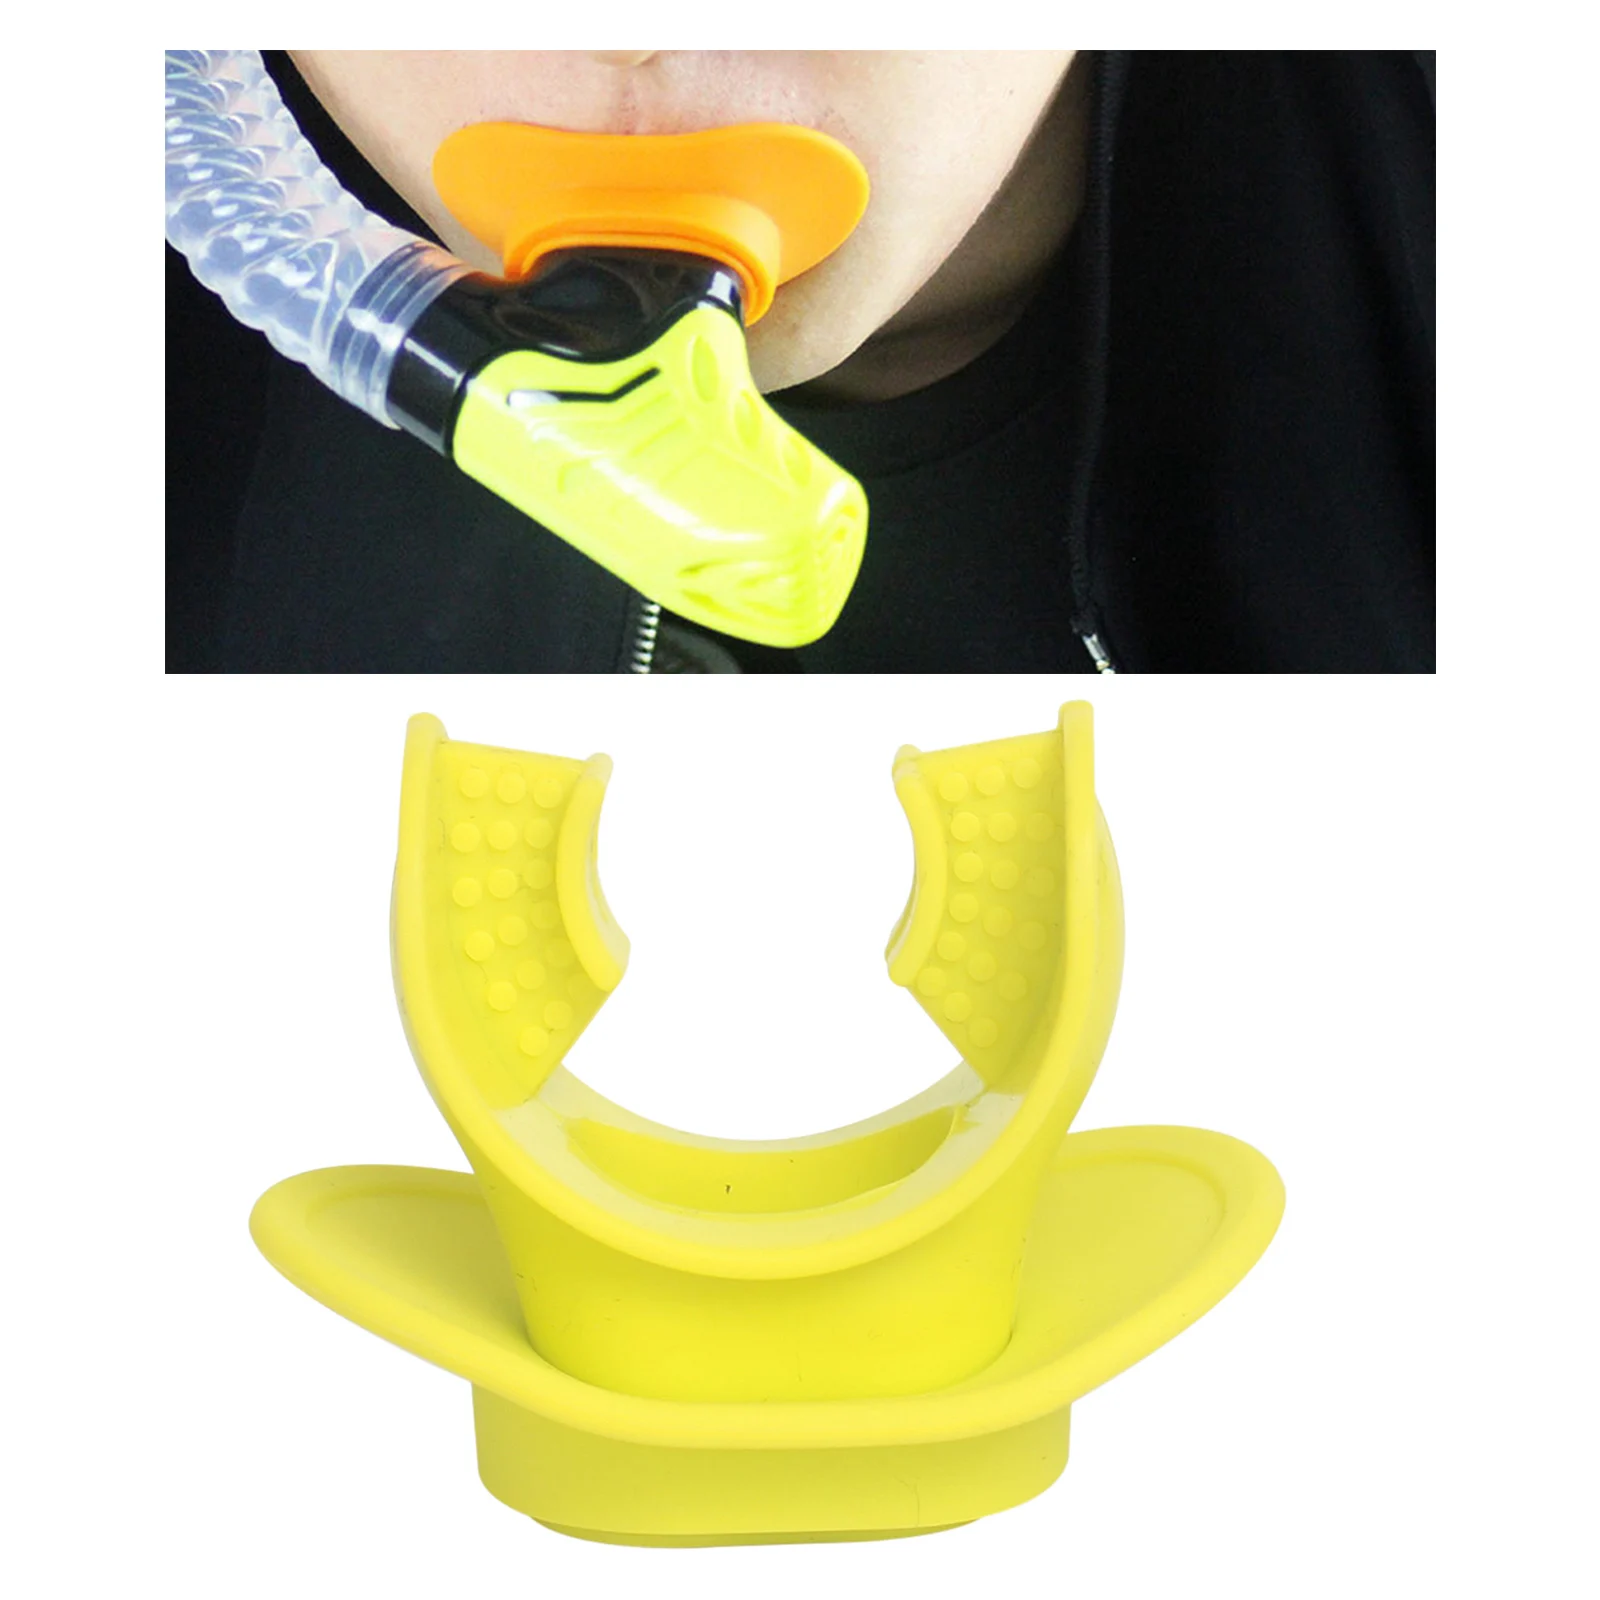 Silicone Diving Bite Mouth Piece Moldable for Scuba Regulators and Snorkels